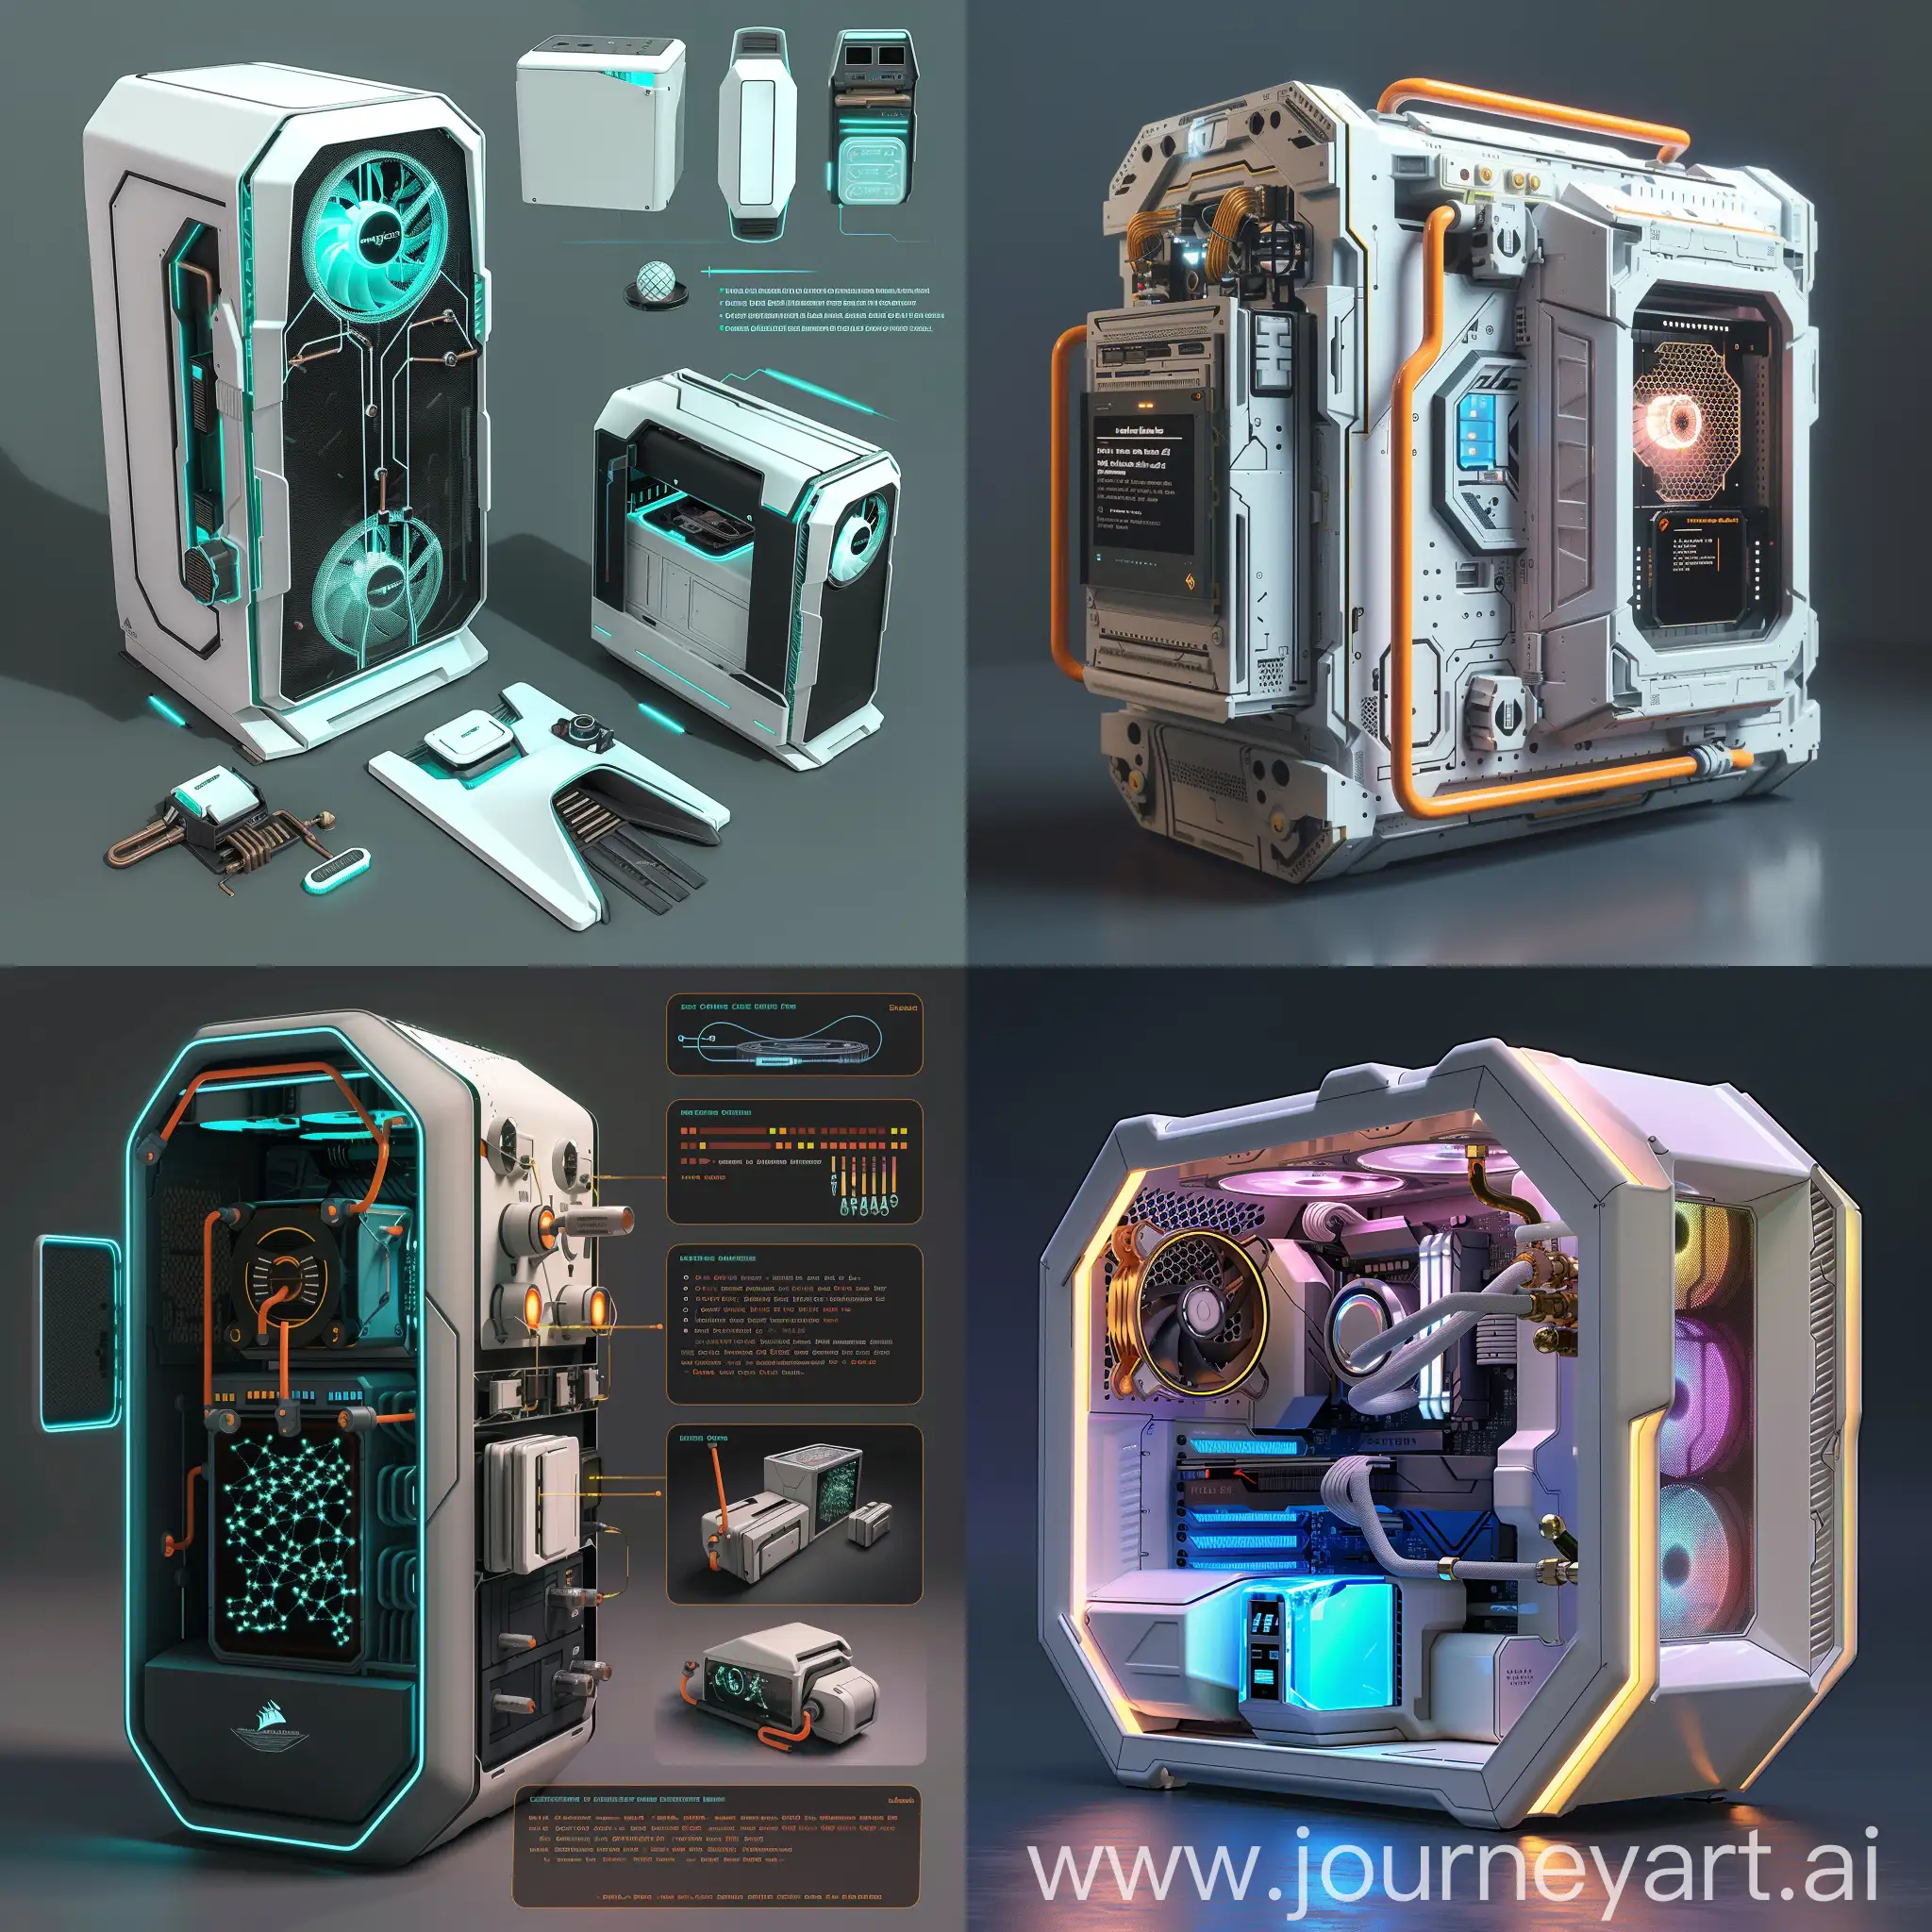 Futuristic-PC-Case-with-Fractal-Cooling-and-Biometric-Authentication-Hatch